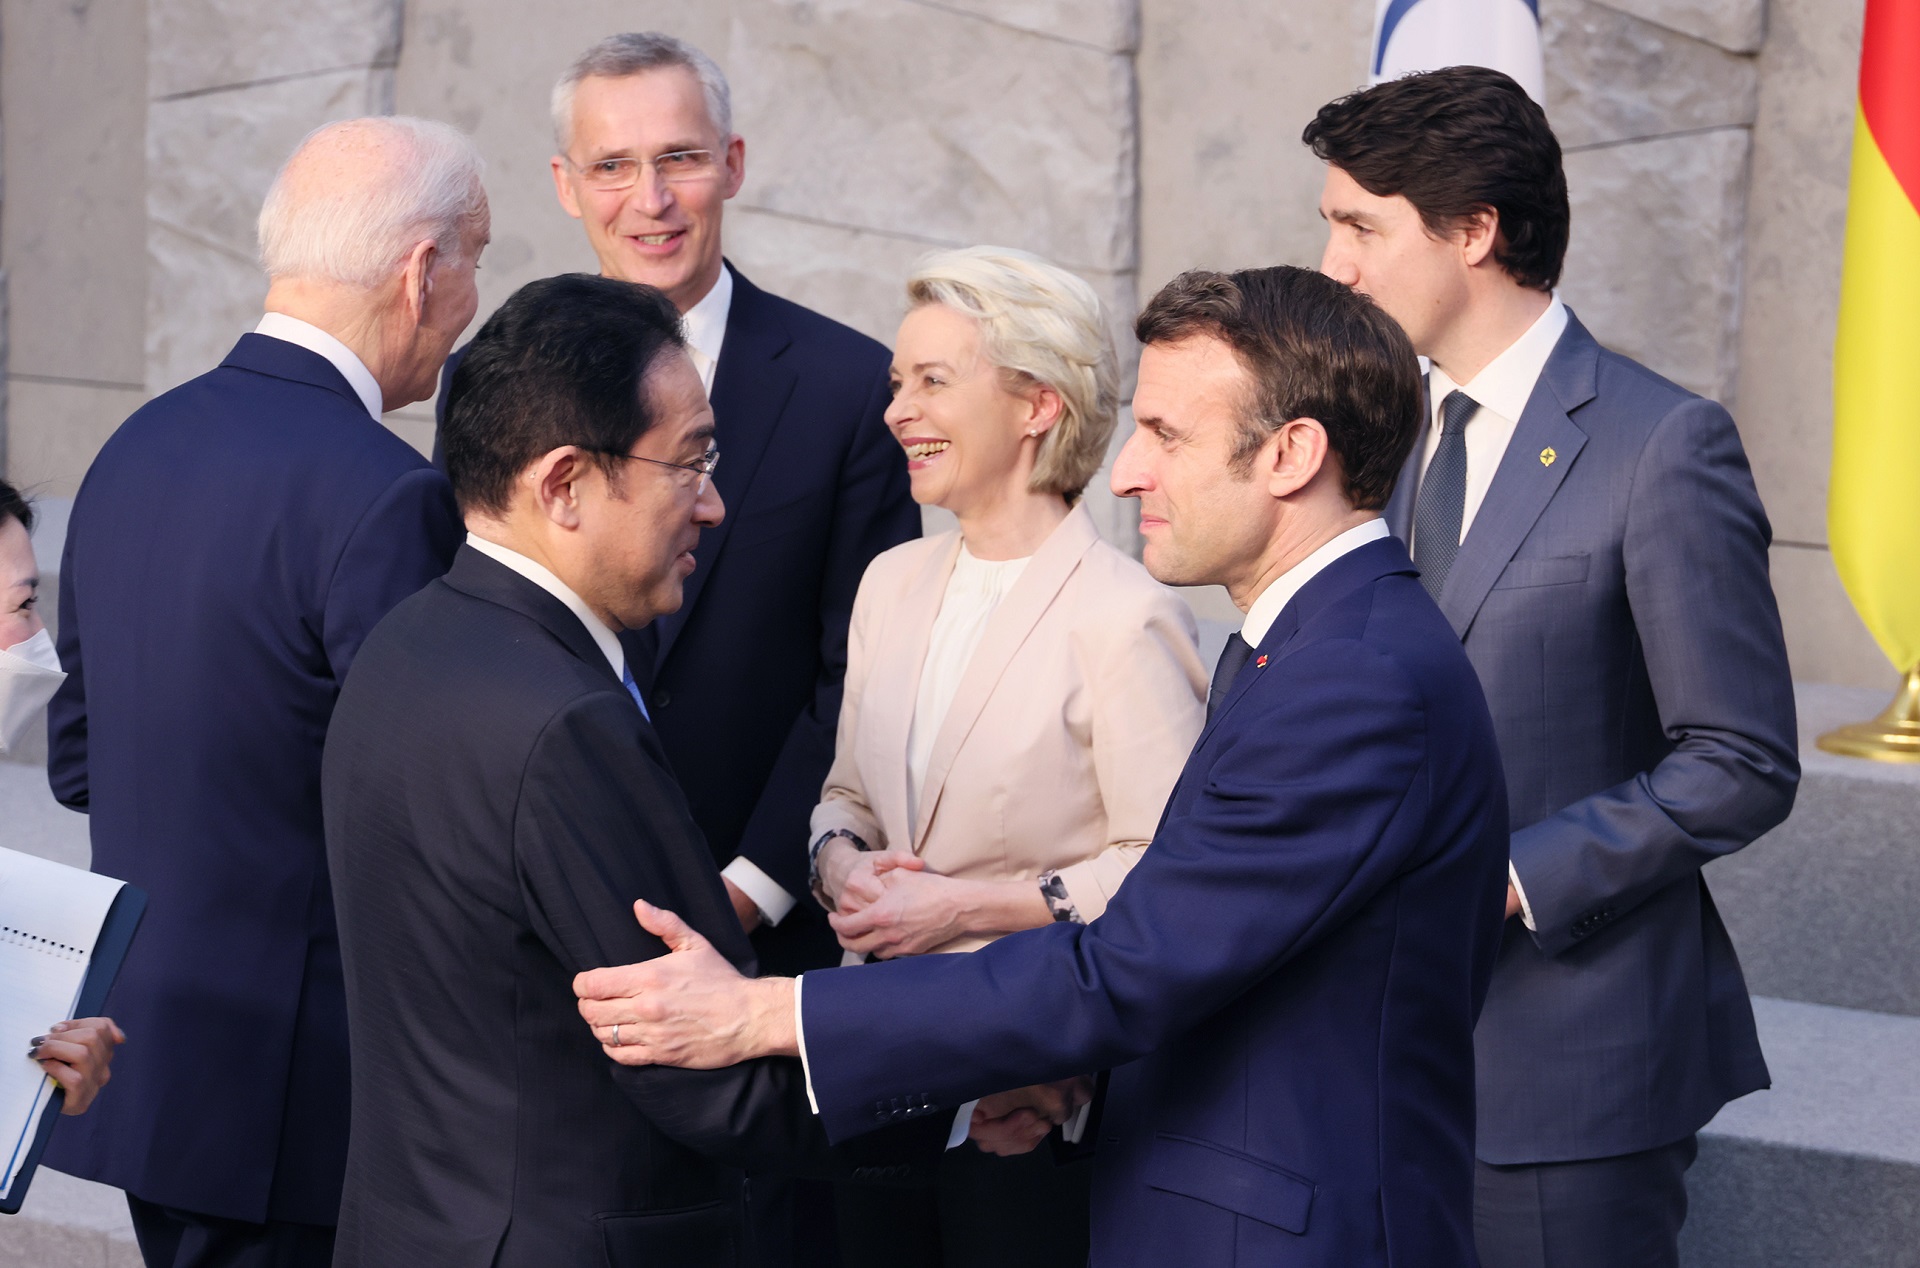 Photograph of the group photograph session with the G7 leaders (1)